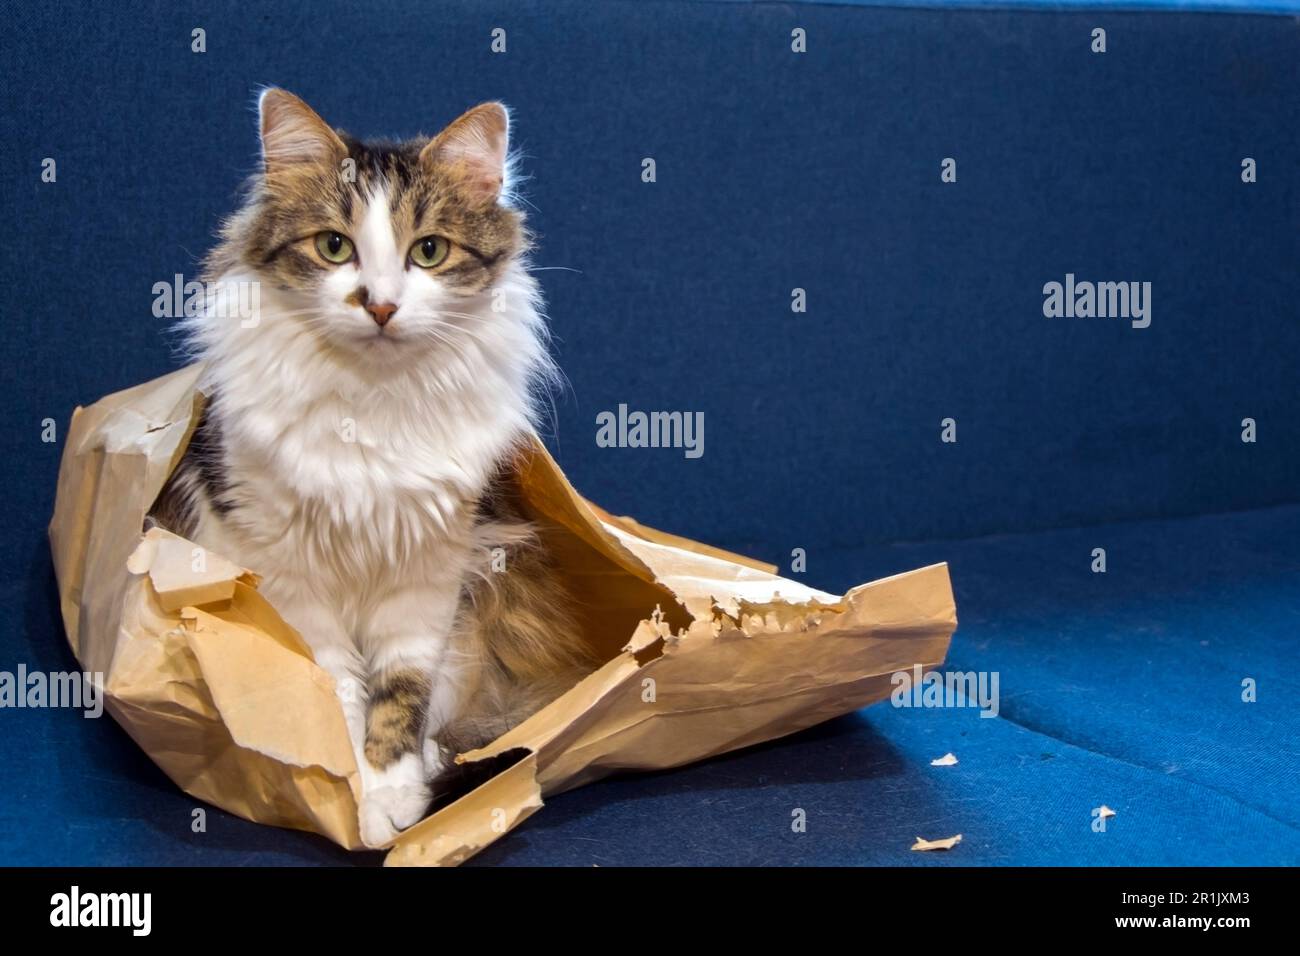 A beautiful tabby domestic cat with long fur and green eyes sitting in a torn apart paper bag on a dark blue sofa and staring at the camera. Stock Photo